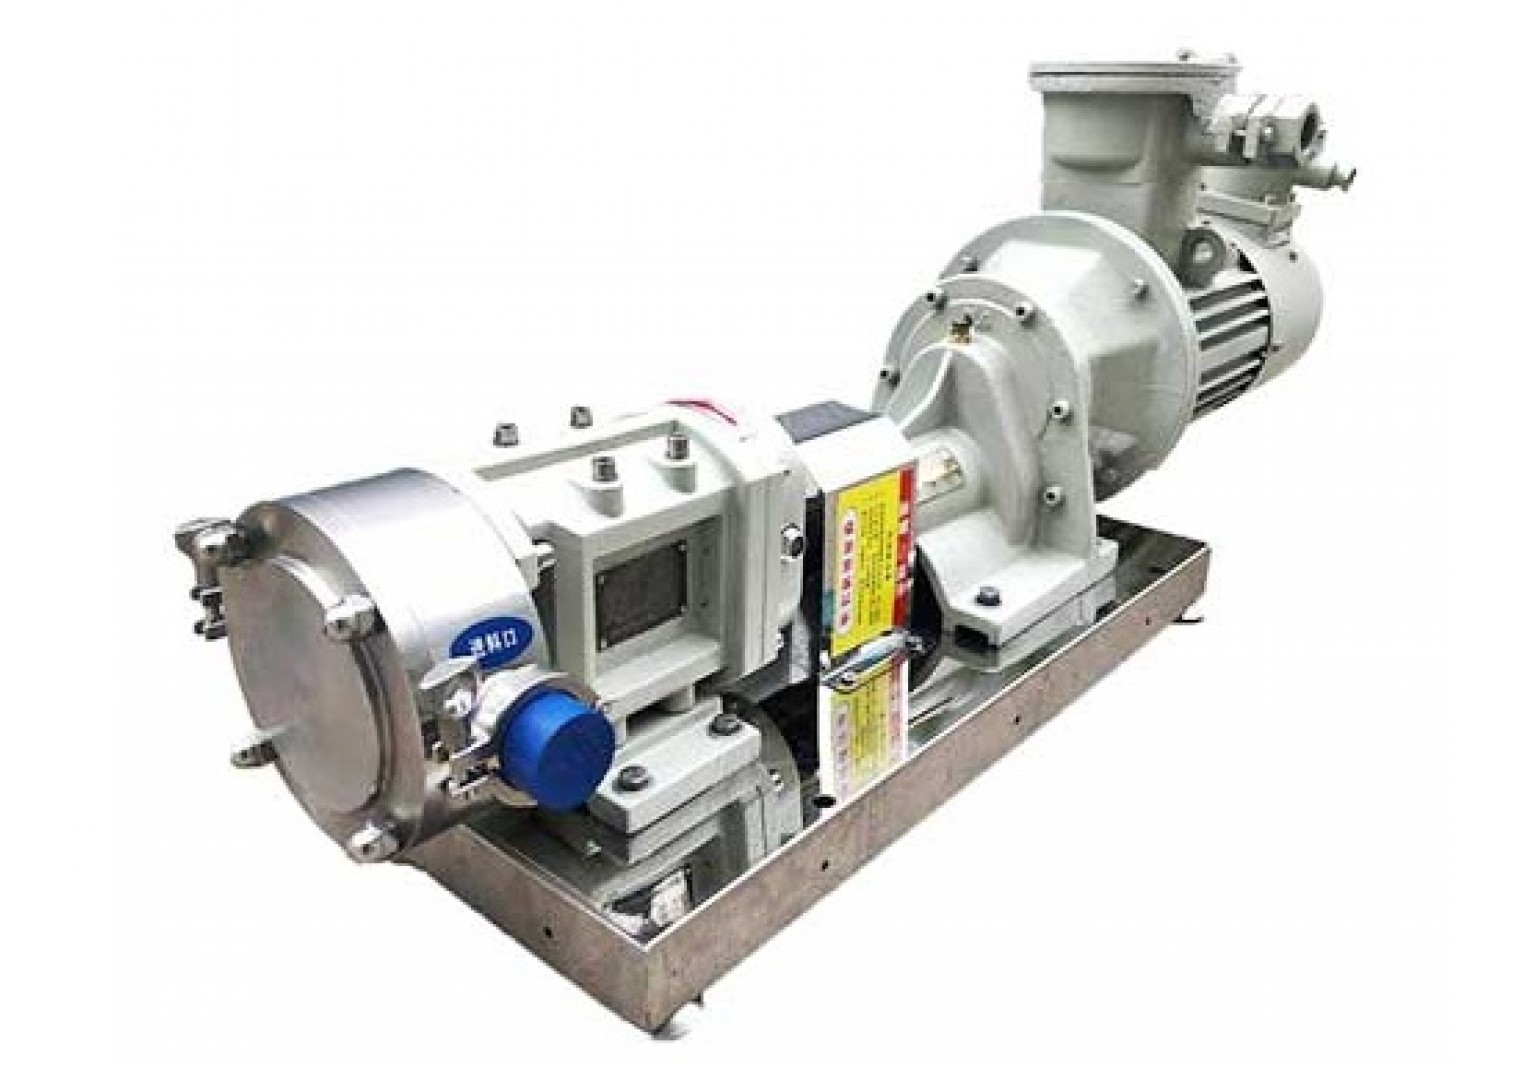 Daily Chemicals Transfer Pump 3RP-32